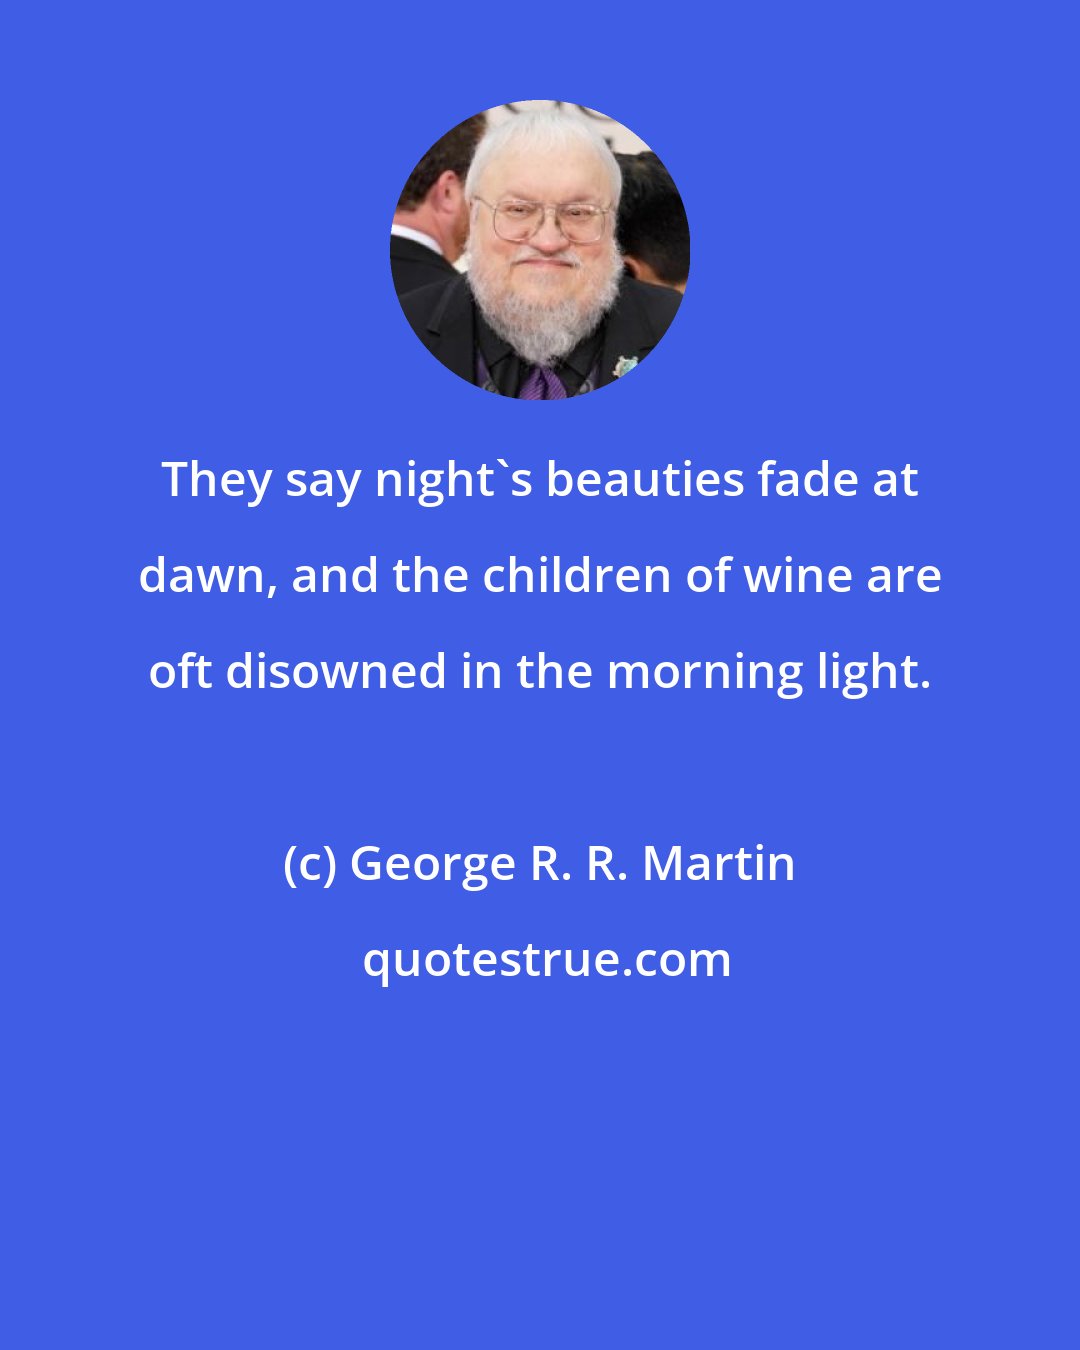 George R. R. Martin: They say night's beauties fade at dawn, and the children of wine are oft disowned in the morning light.